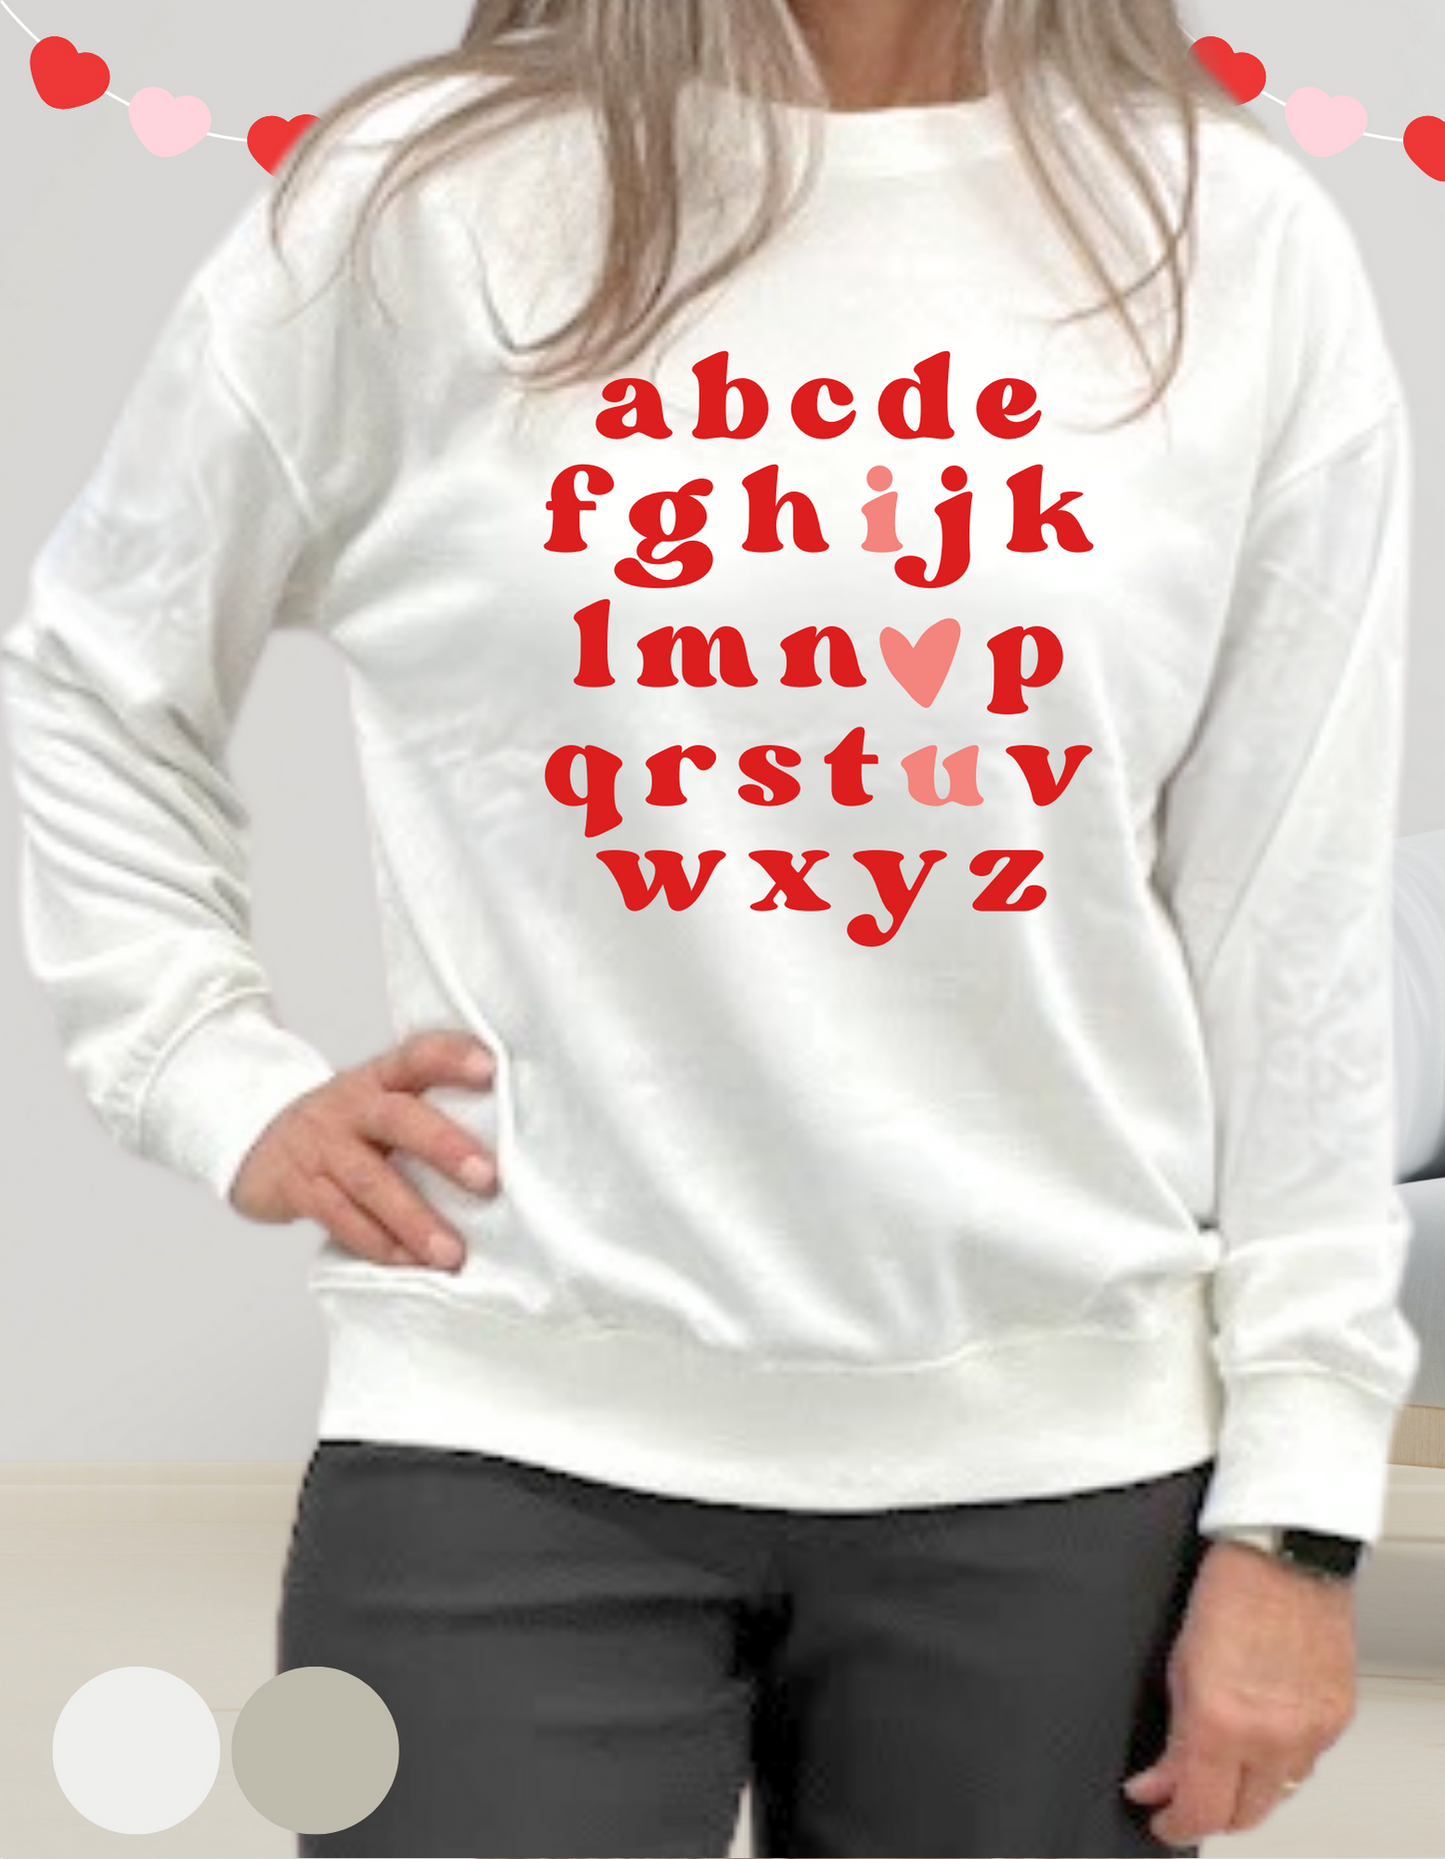 ABC I Love You, sweatshirt in two colors